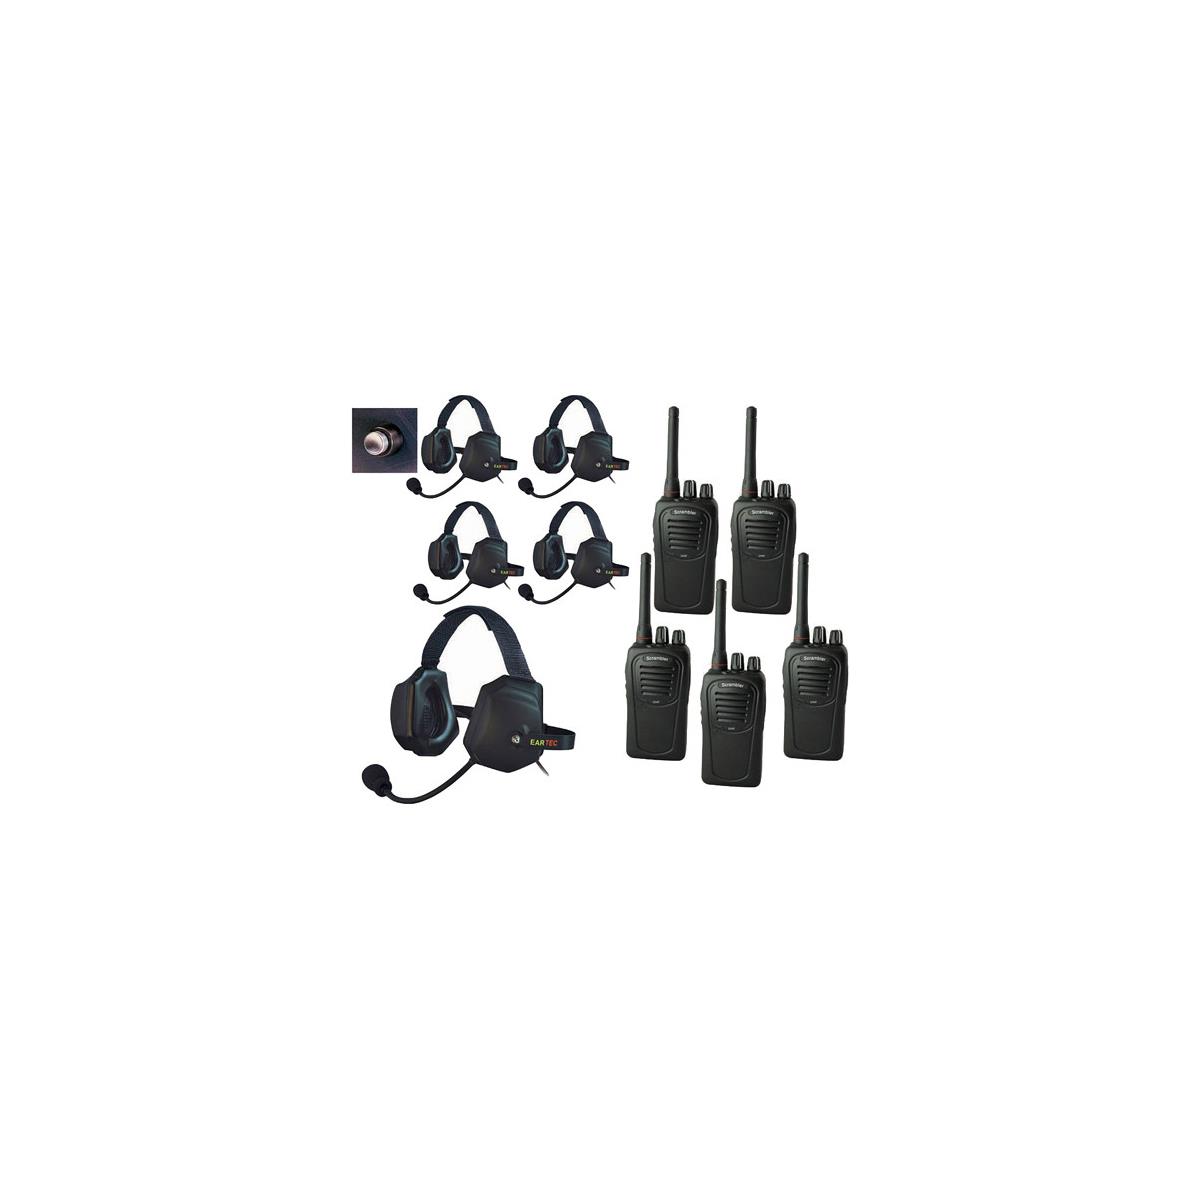 Image of Eartec SC-1000 5-User Two-Way Radio System